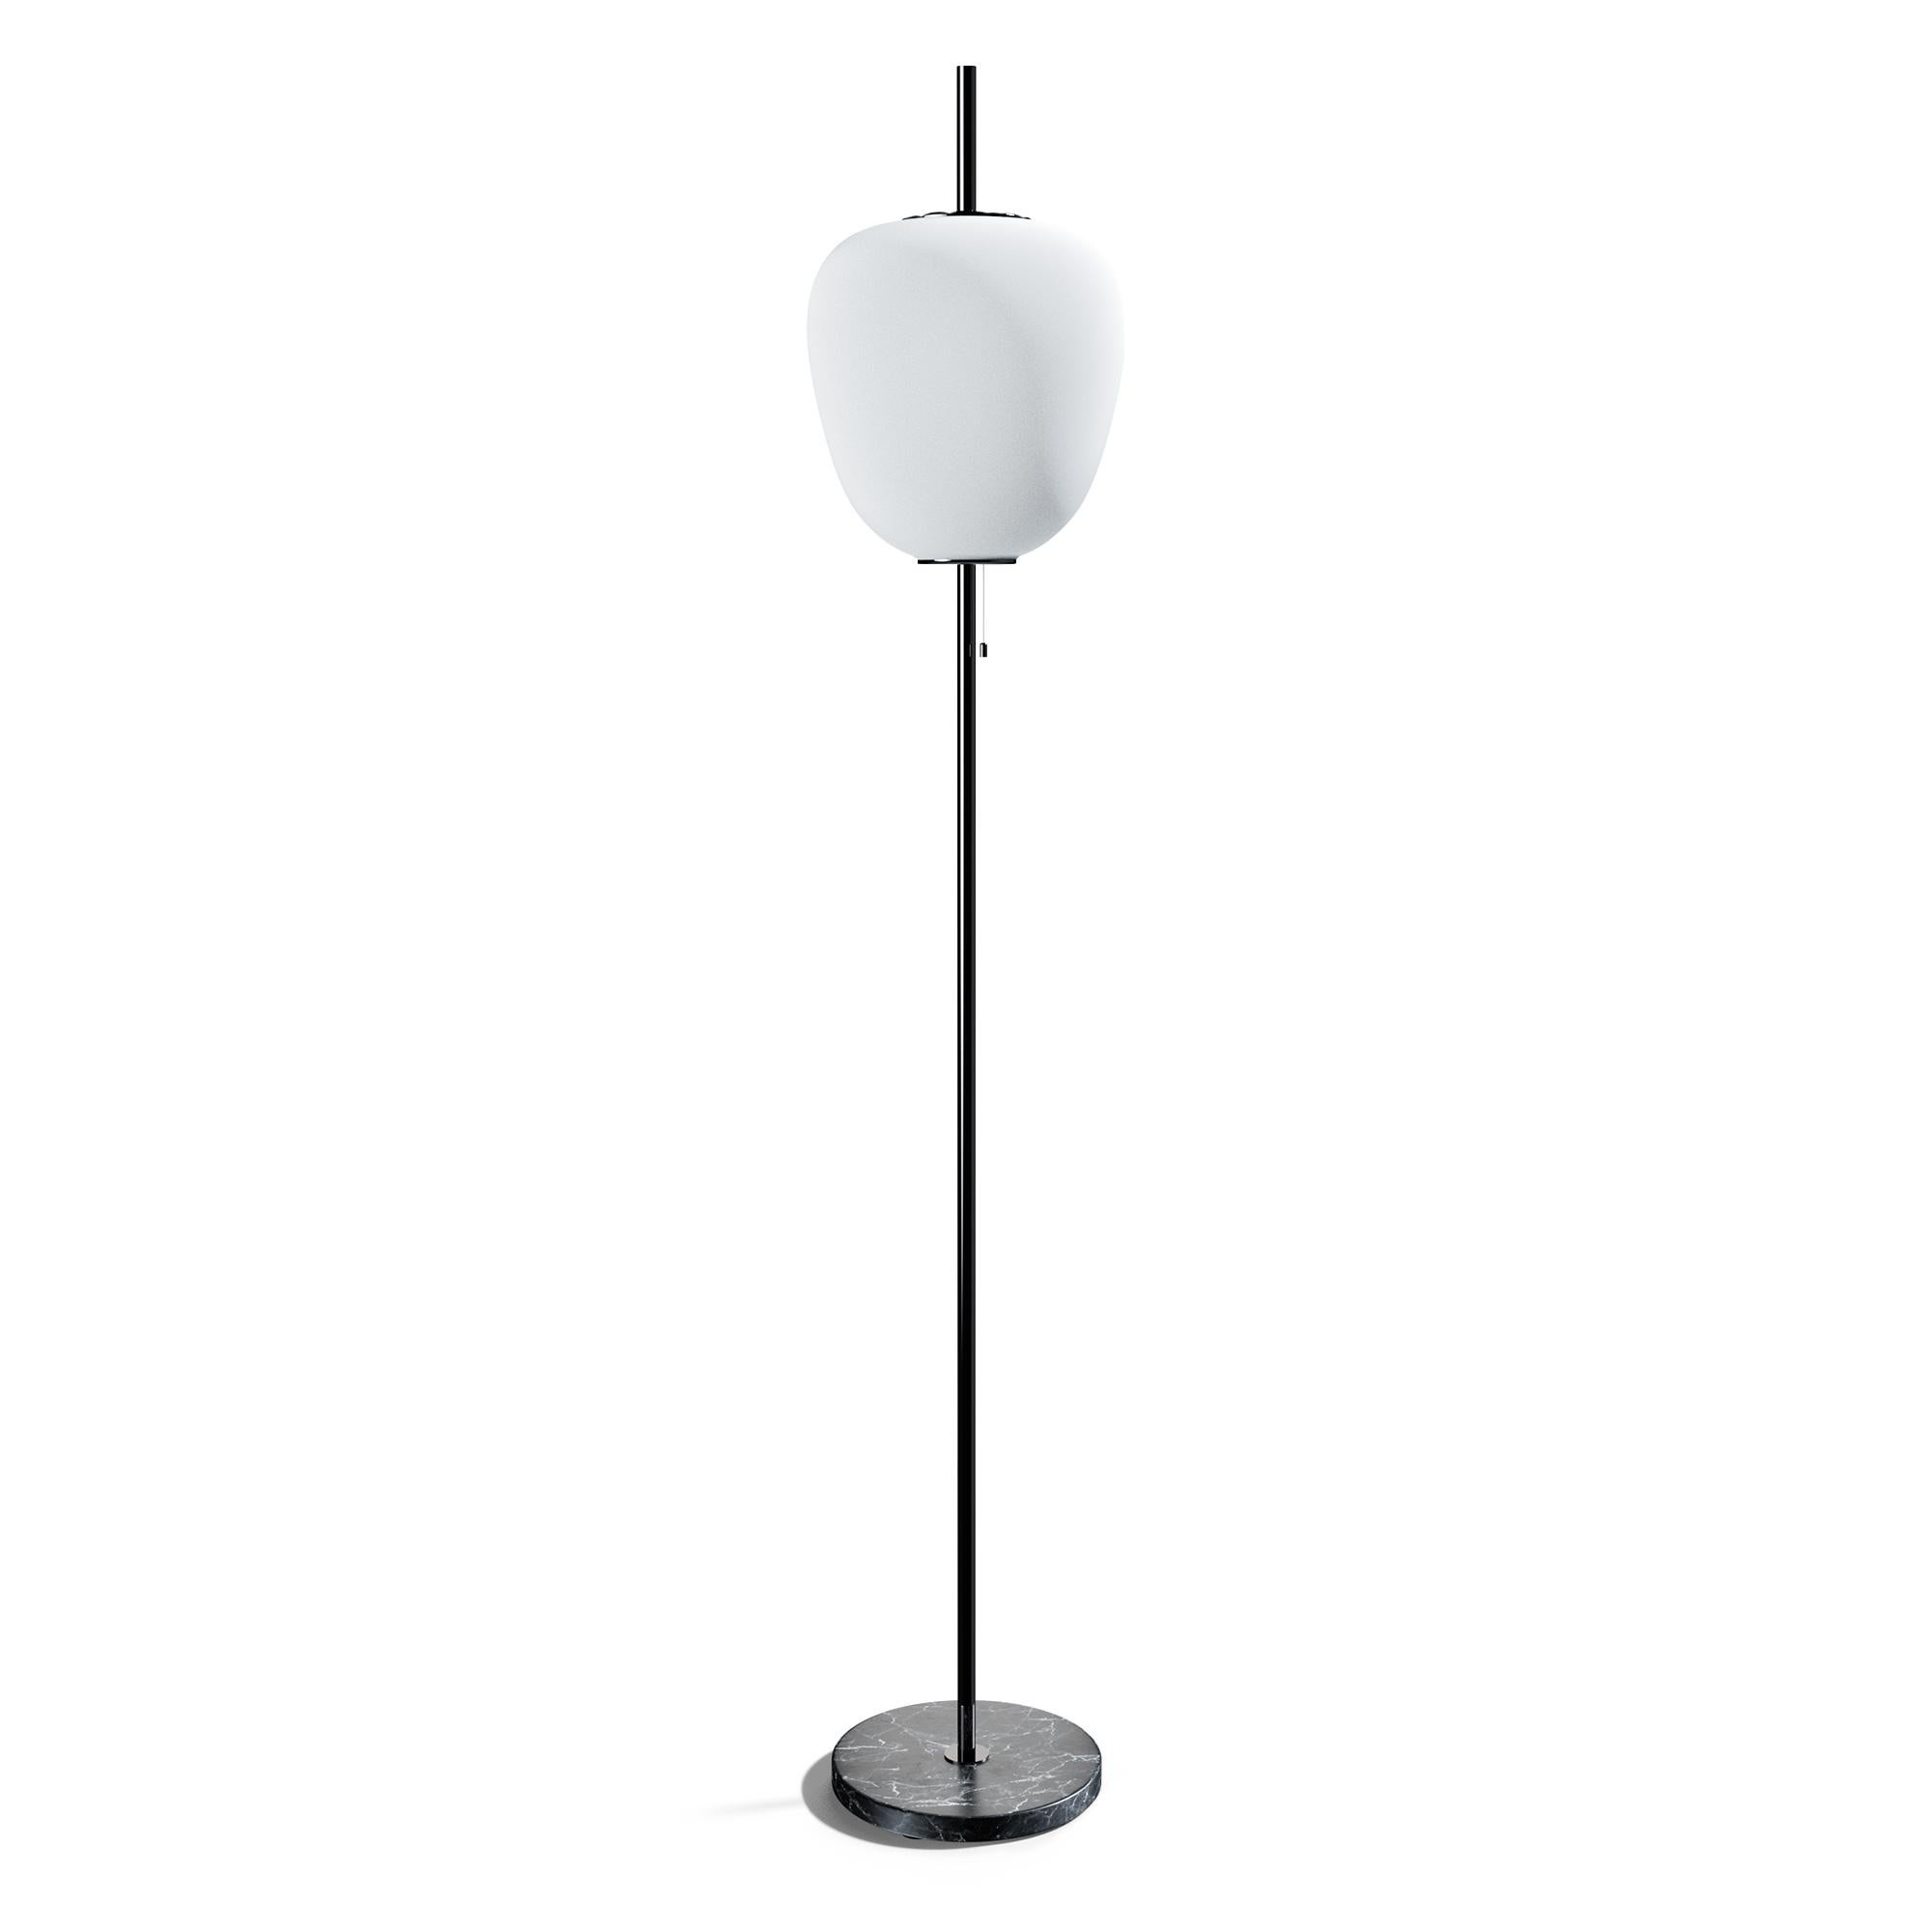 Large Joseph-André Motte J14 floor lamp in gunmetal and black marble for Disderot. 

Originally designed in 1957, this sculptural floor lamp is a newly produced numbered edition with authentication certificate made in France by Disderot with many